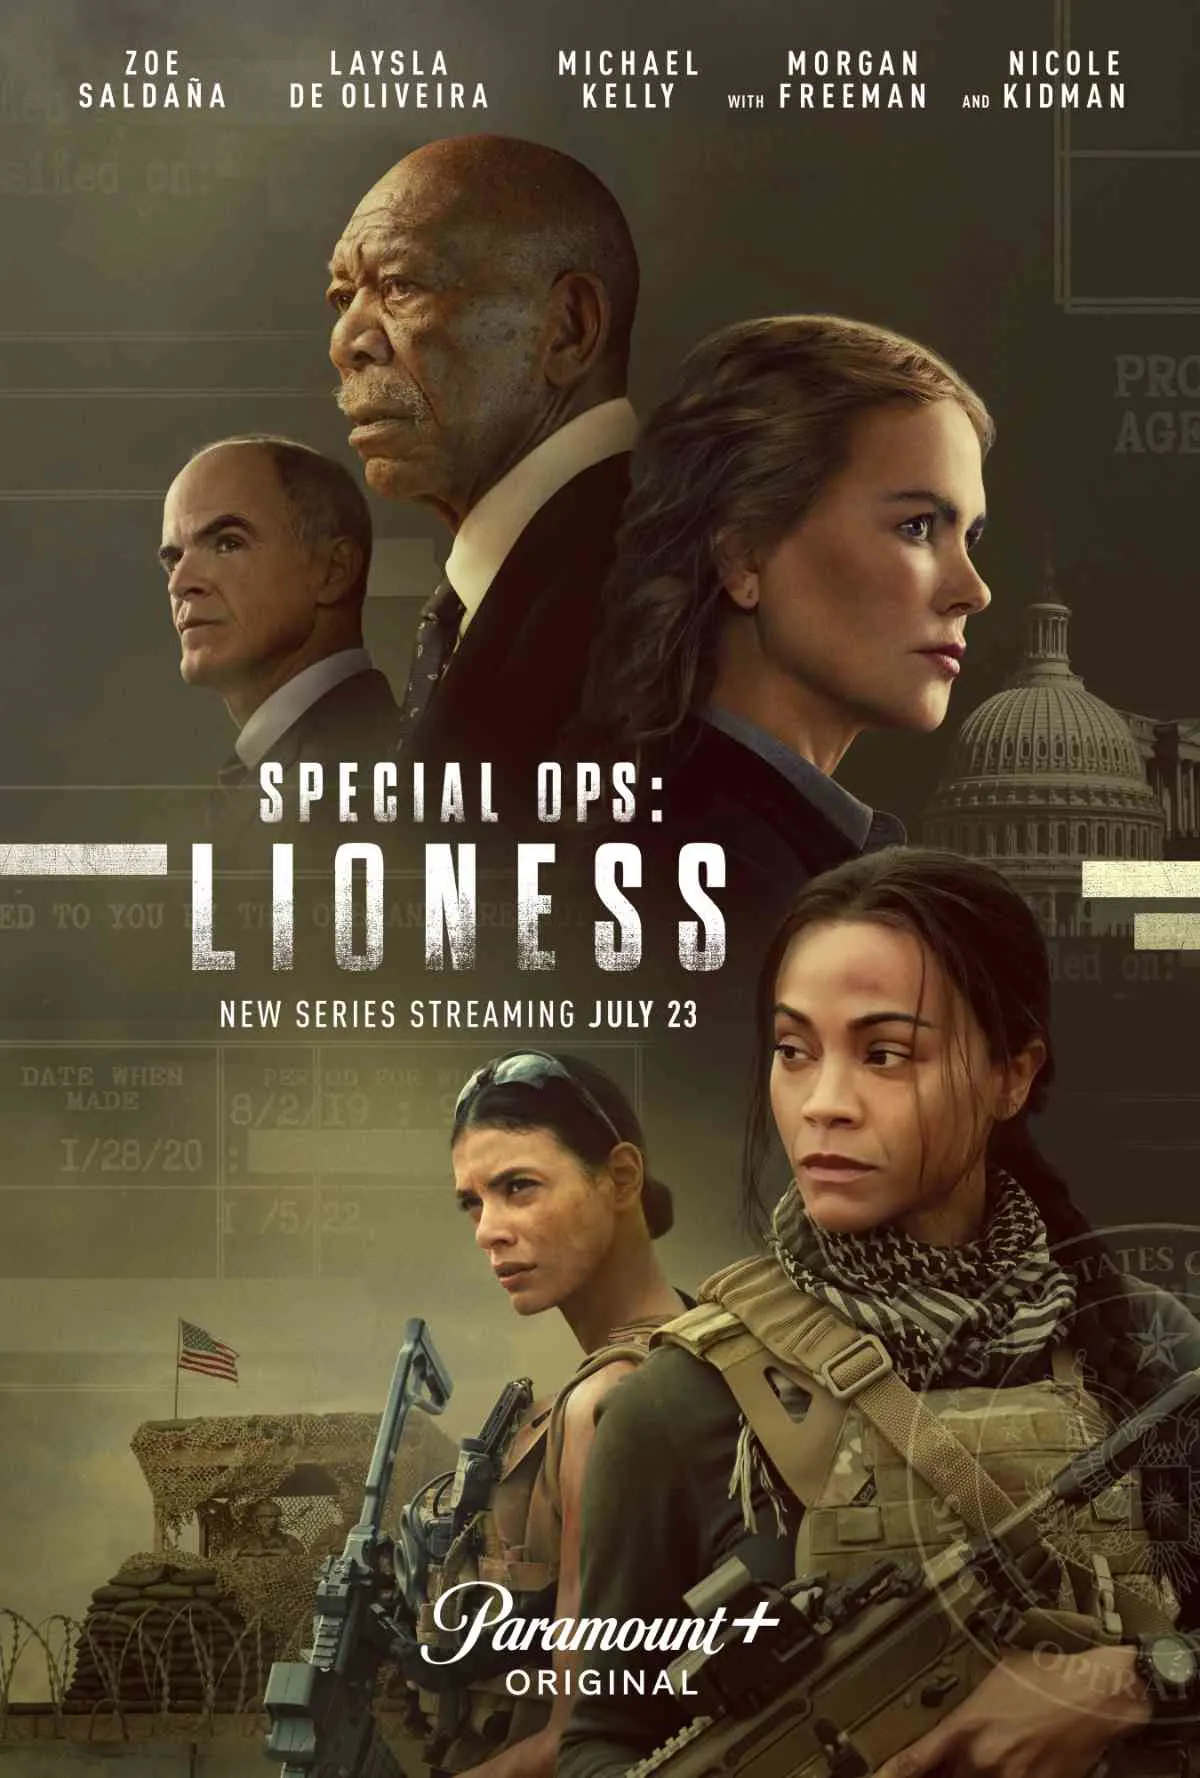 Special Ops: Lioness Trailer